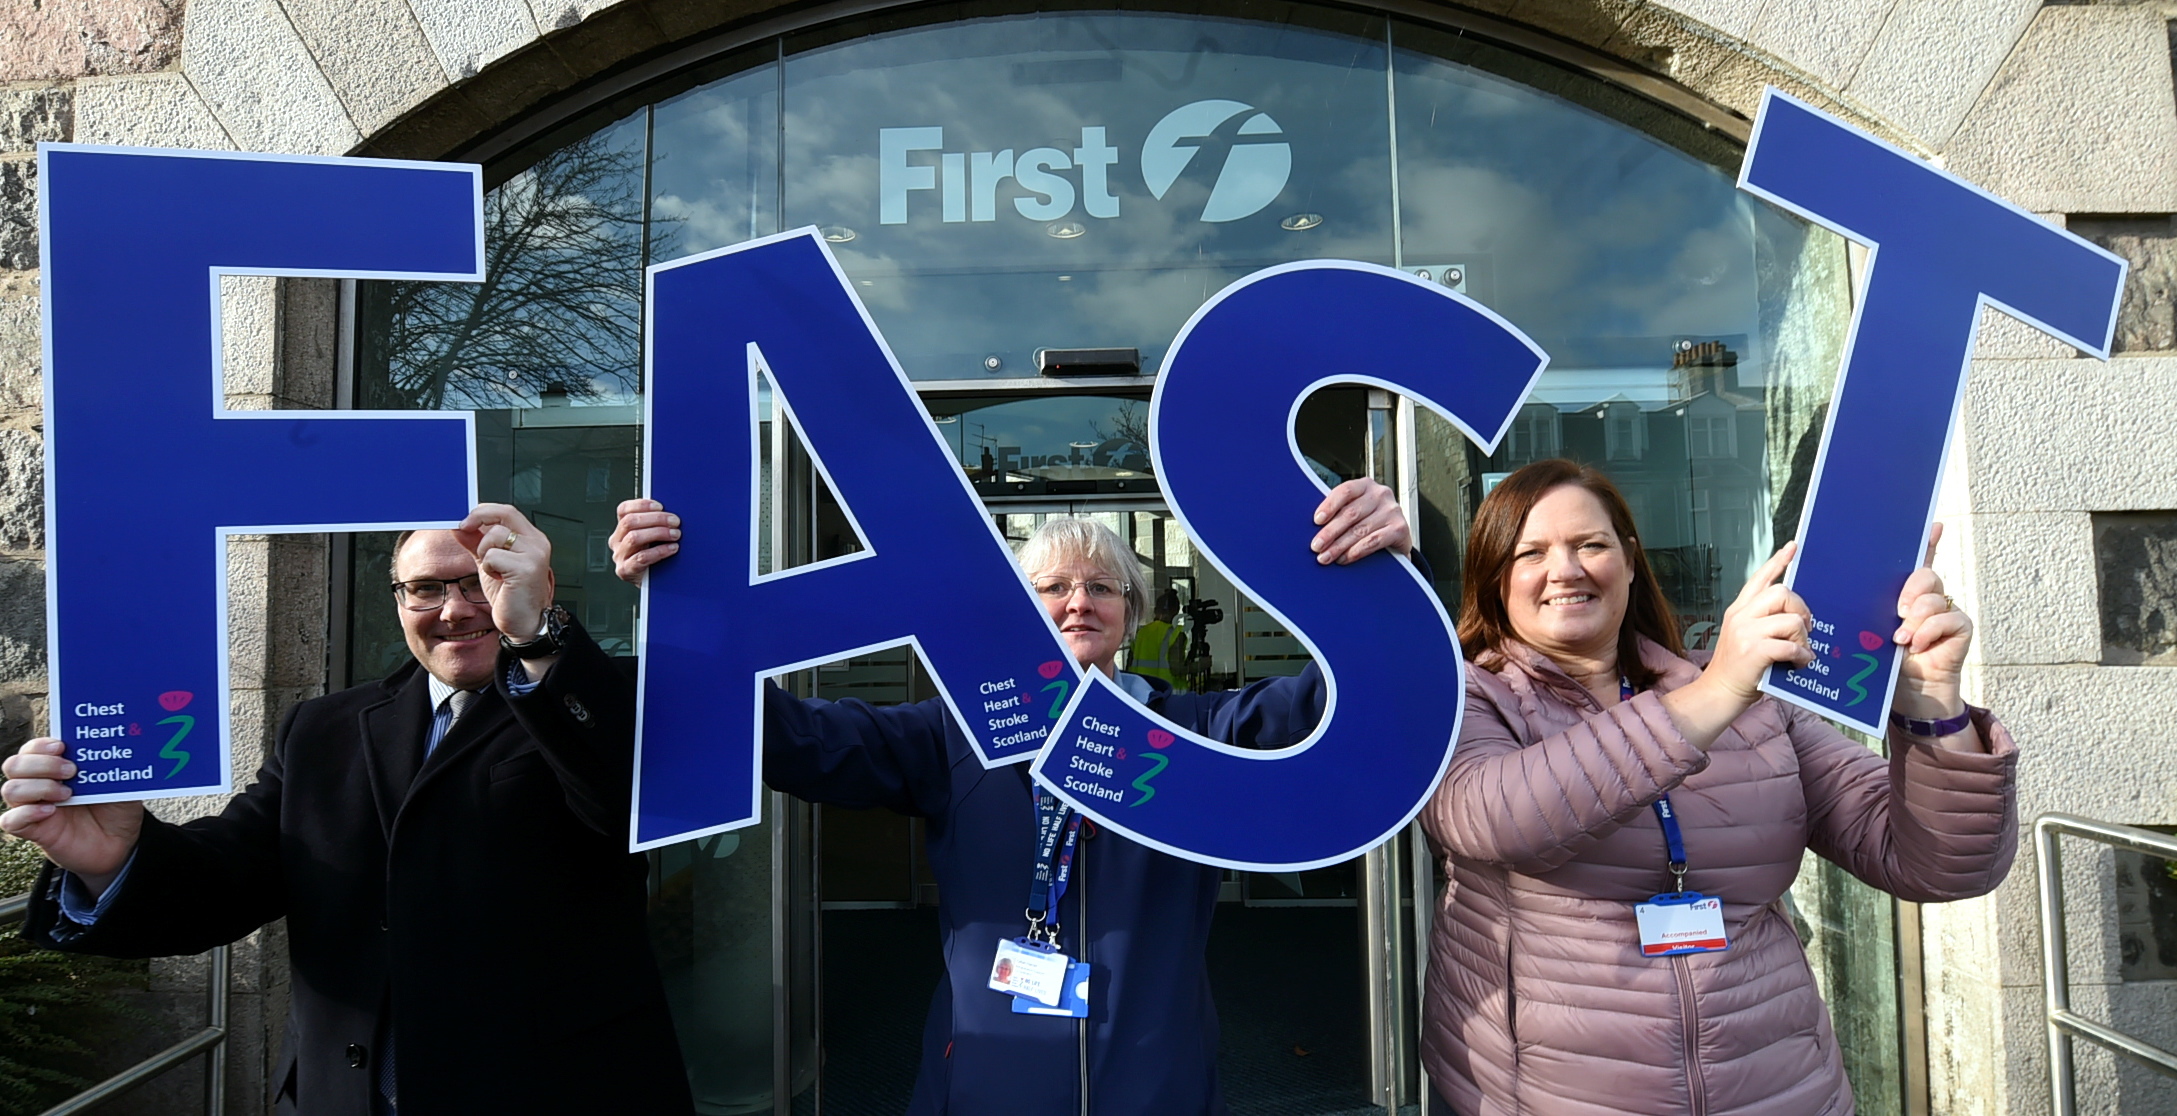 First Aberdeen commercial director Graeme Macfarlan, Gillian Harrold from Chest Heart & Stroke Scotland and NHS Grampian's stroke managed clinical network lead Therese Lebedis